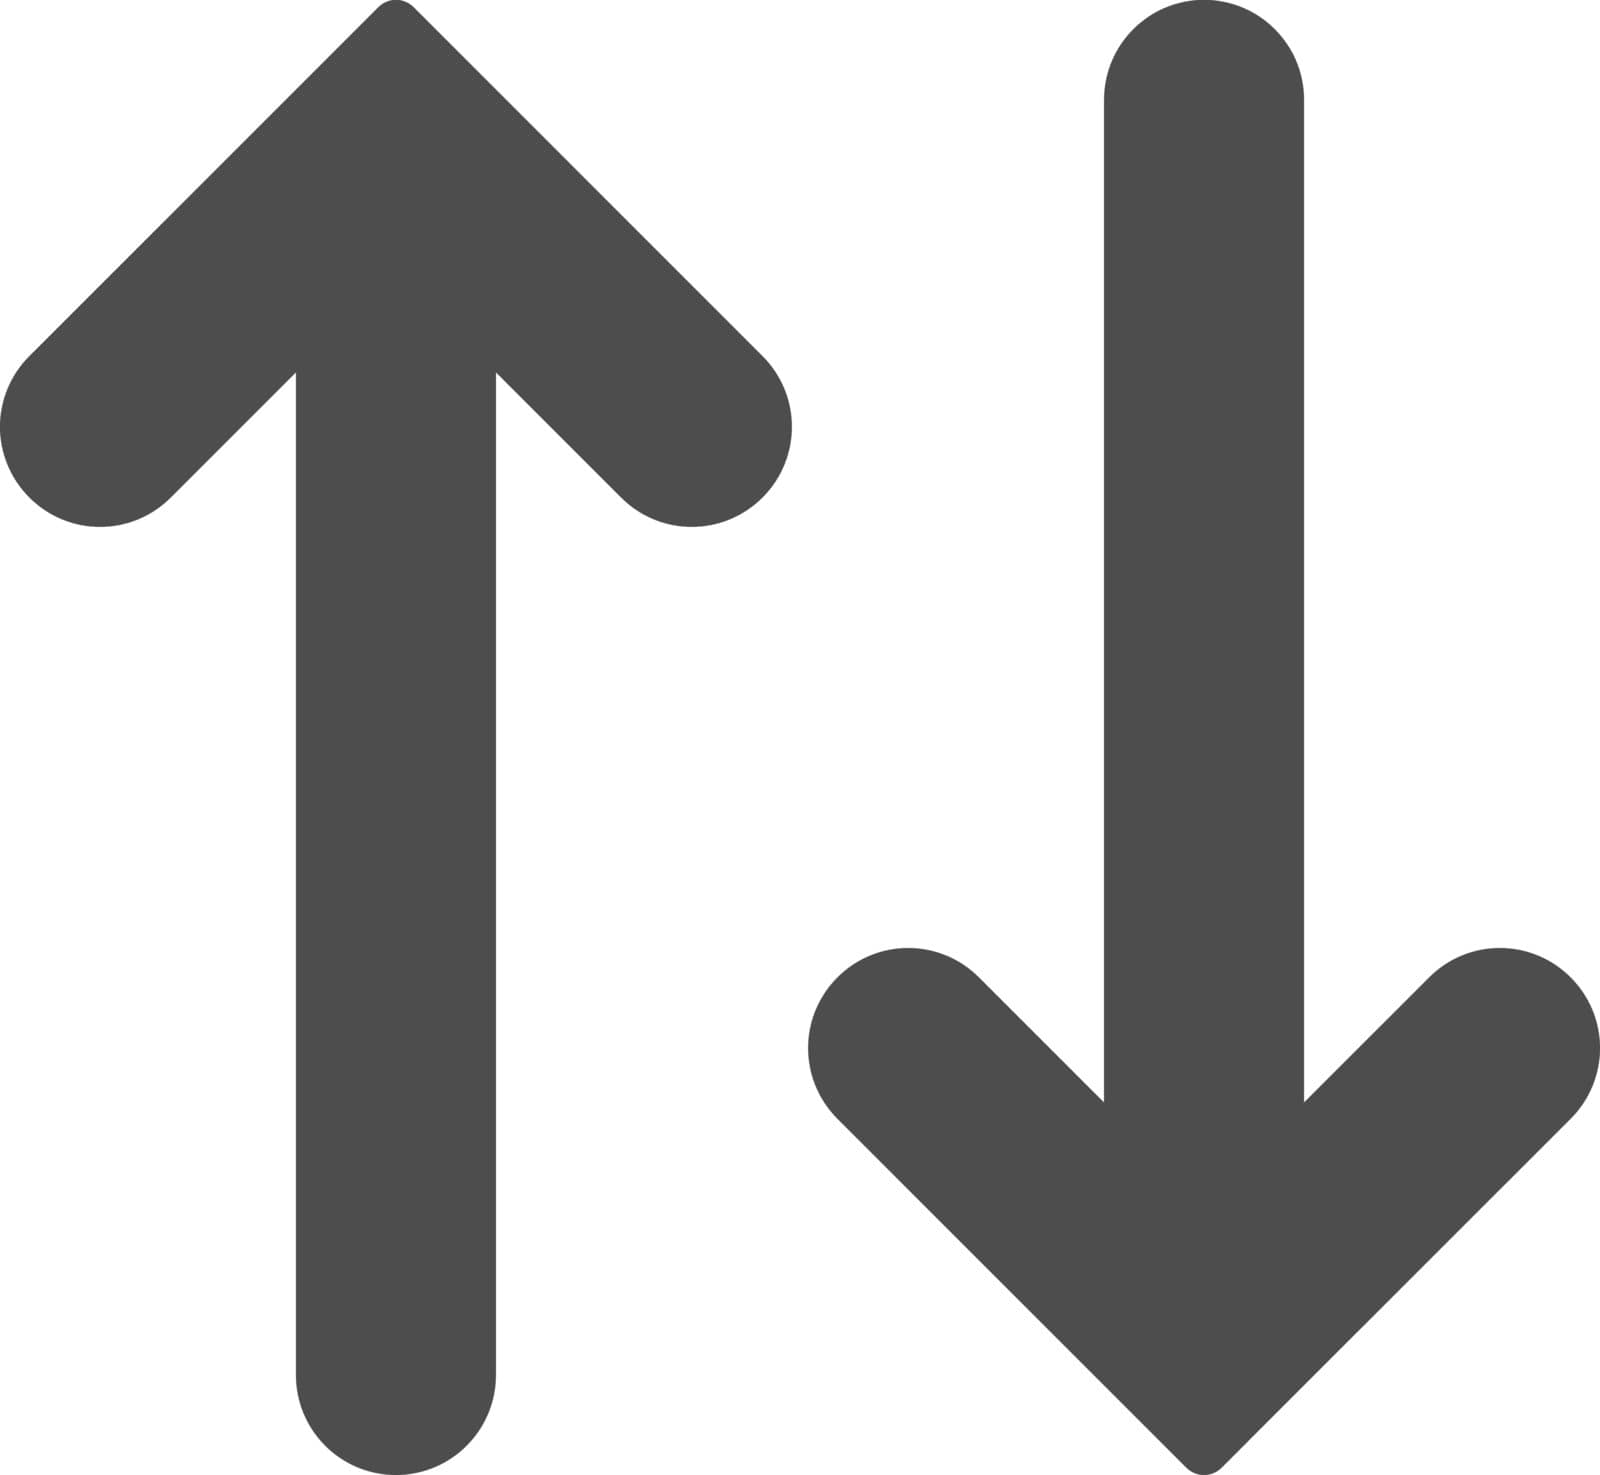 Flip Vertical icon from Primitive Set. This isolated flat symbol is drawn with gray color on a white background, angles are rounded.